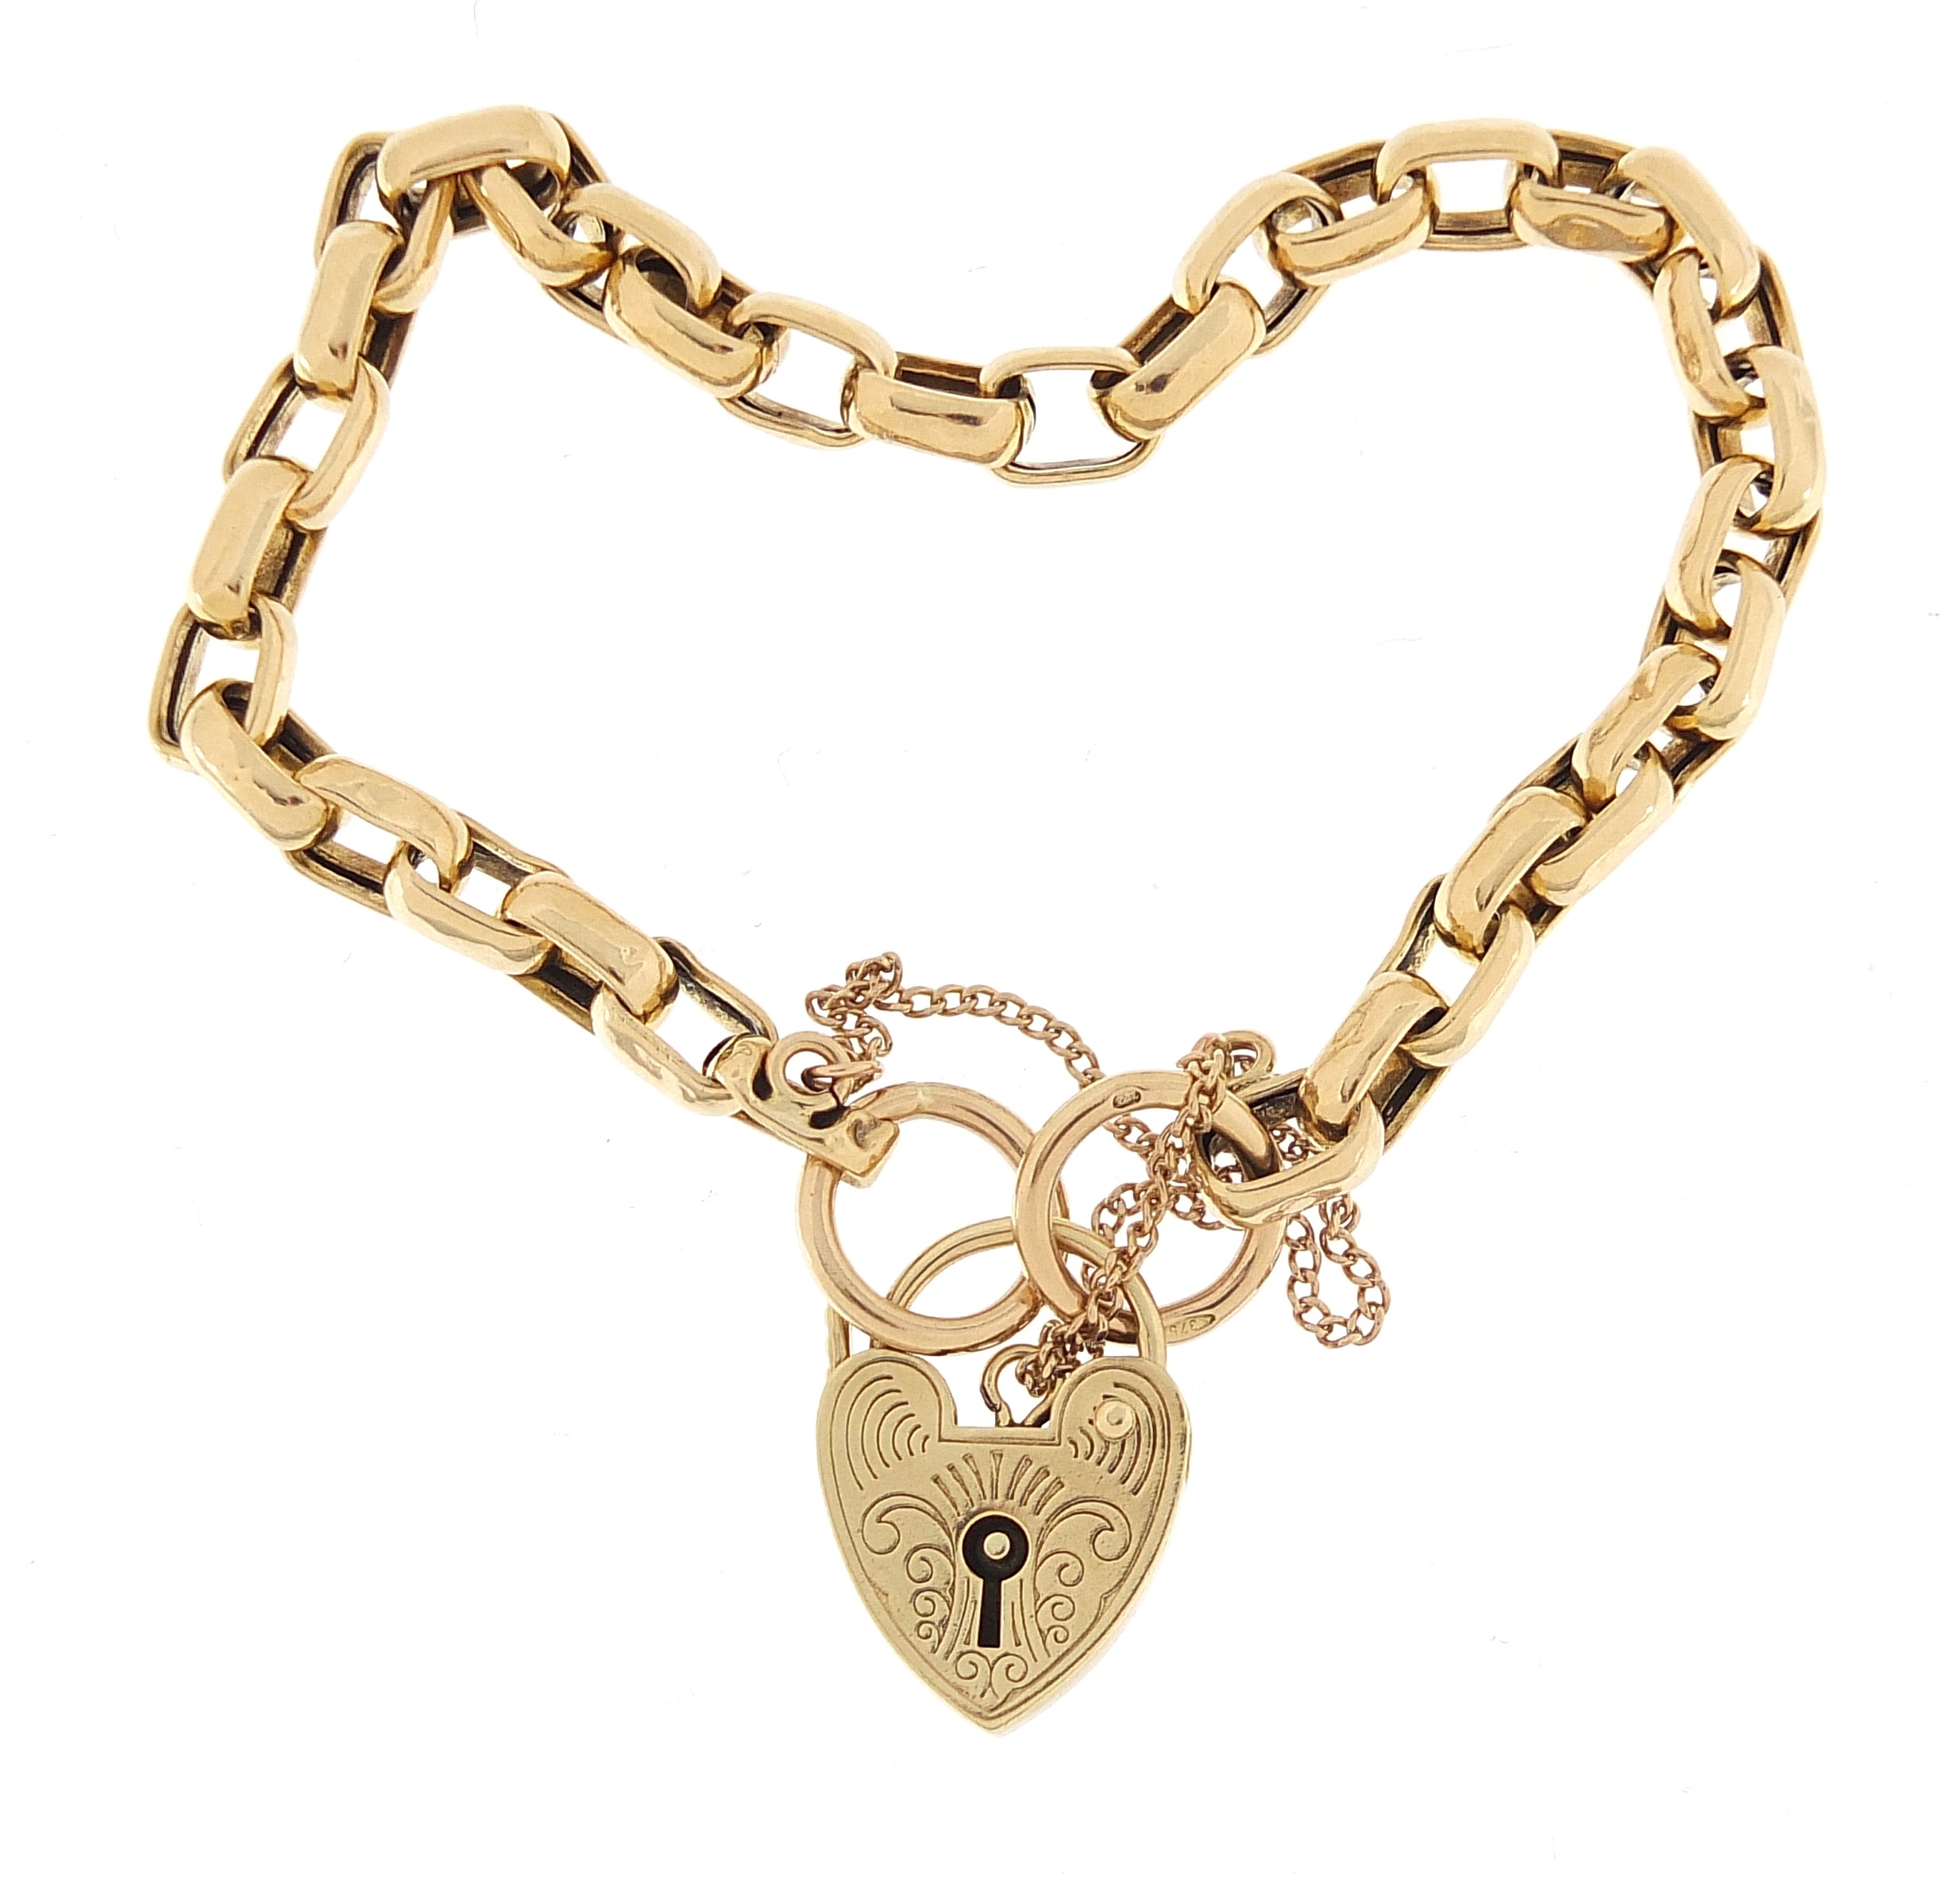 9ct gold long Belcher link bracelet with love heart padlock, 18cm in length, 7.5g - this lot is sold